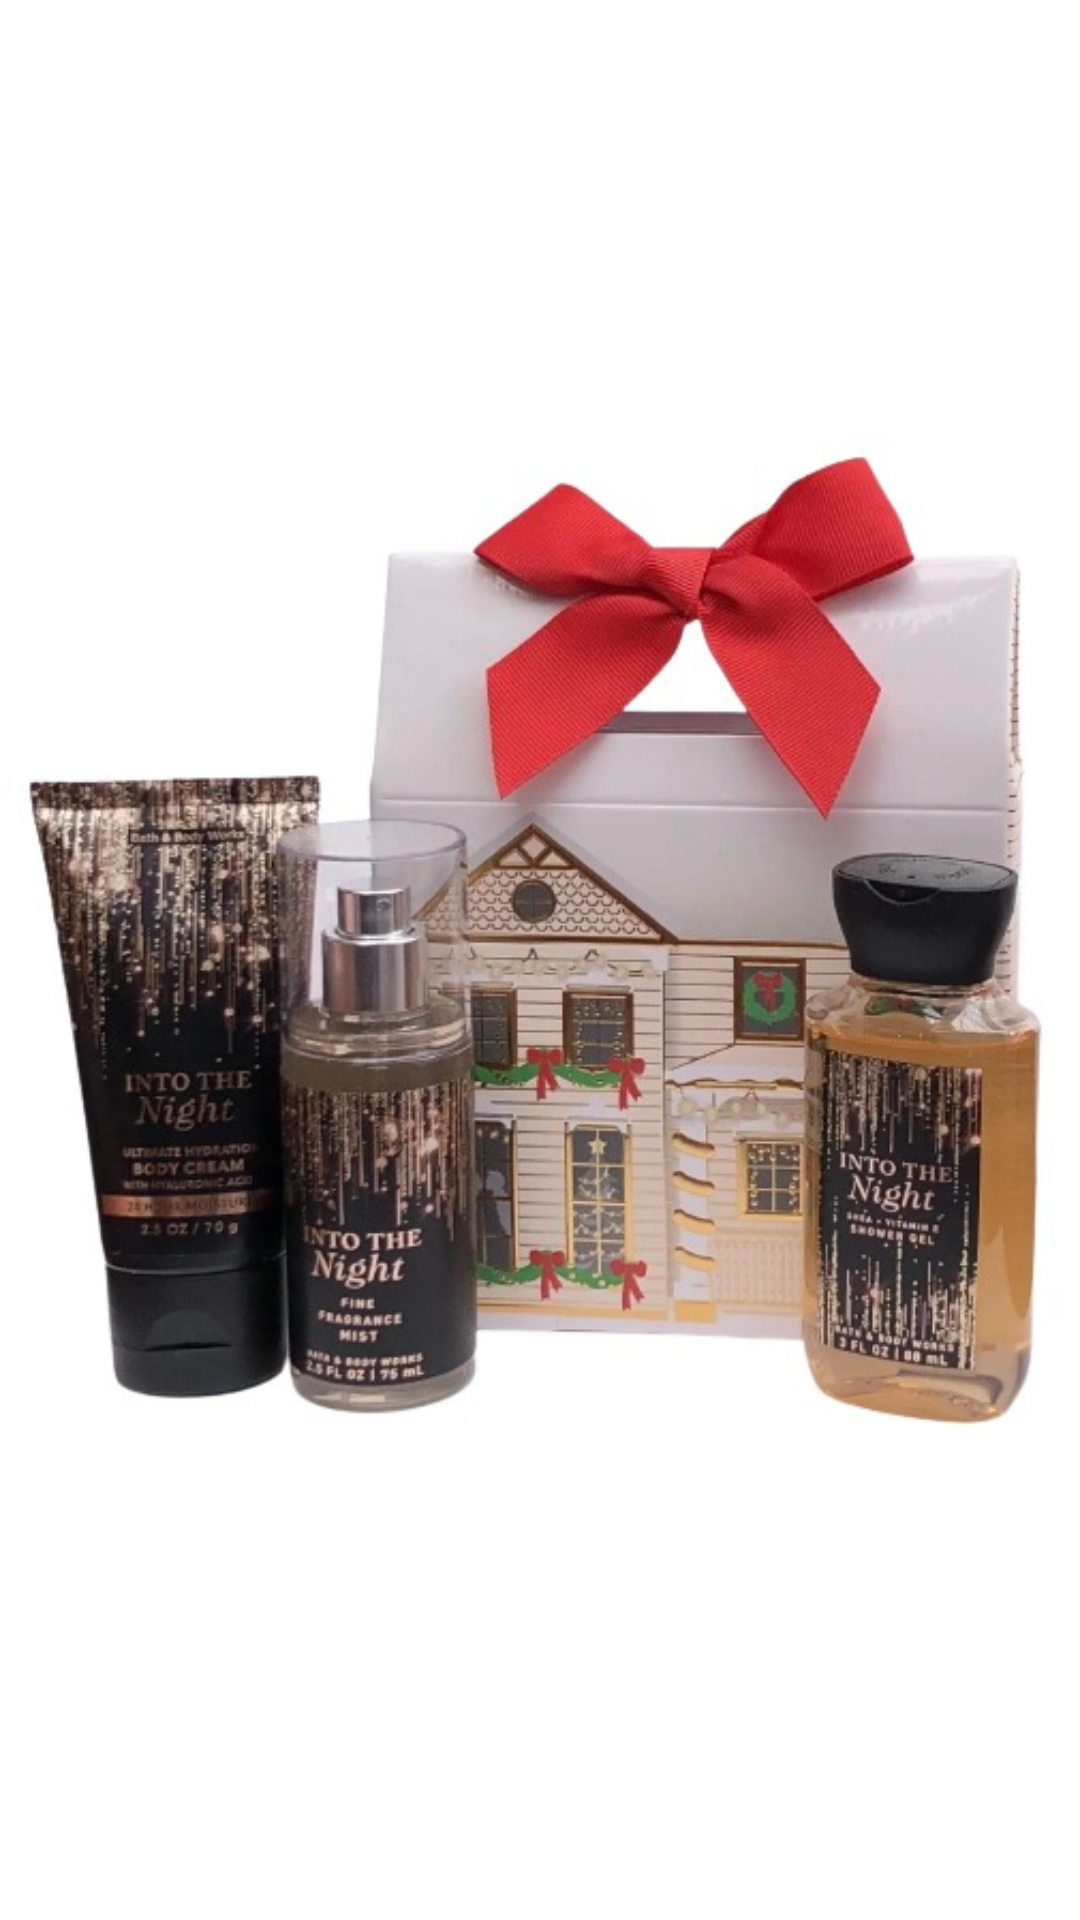 NEW Bath & Body Works Into The Night Gift Set